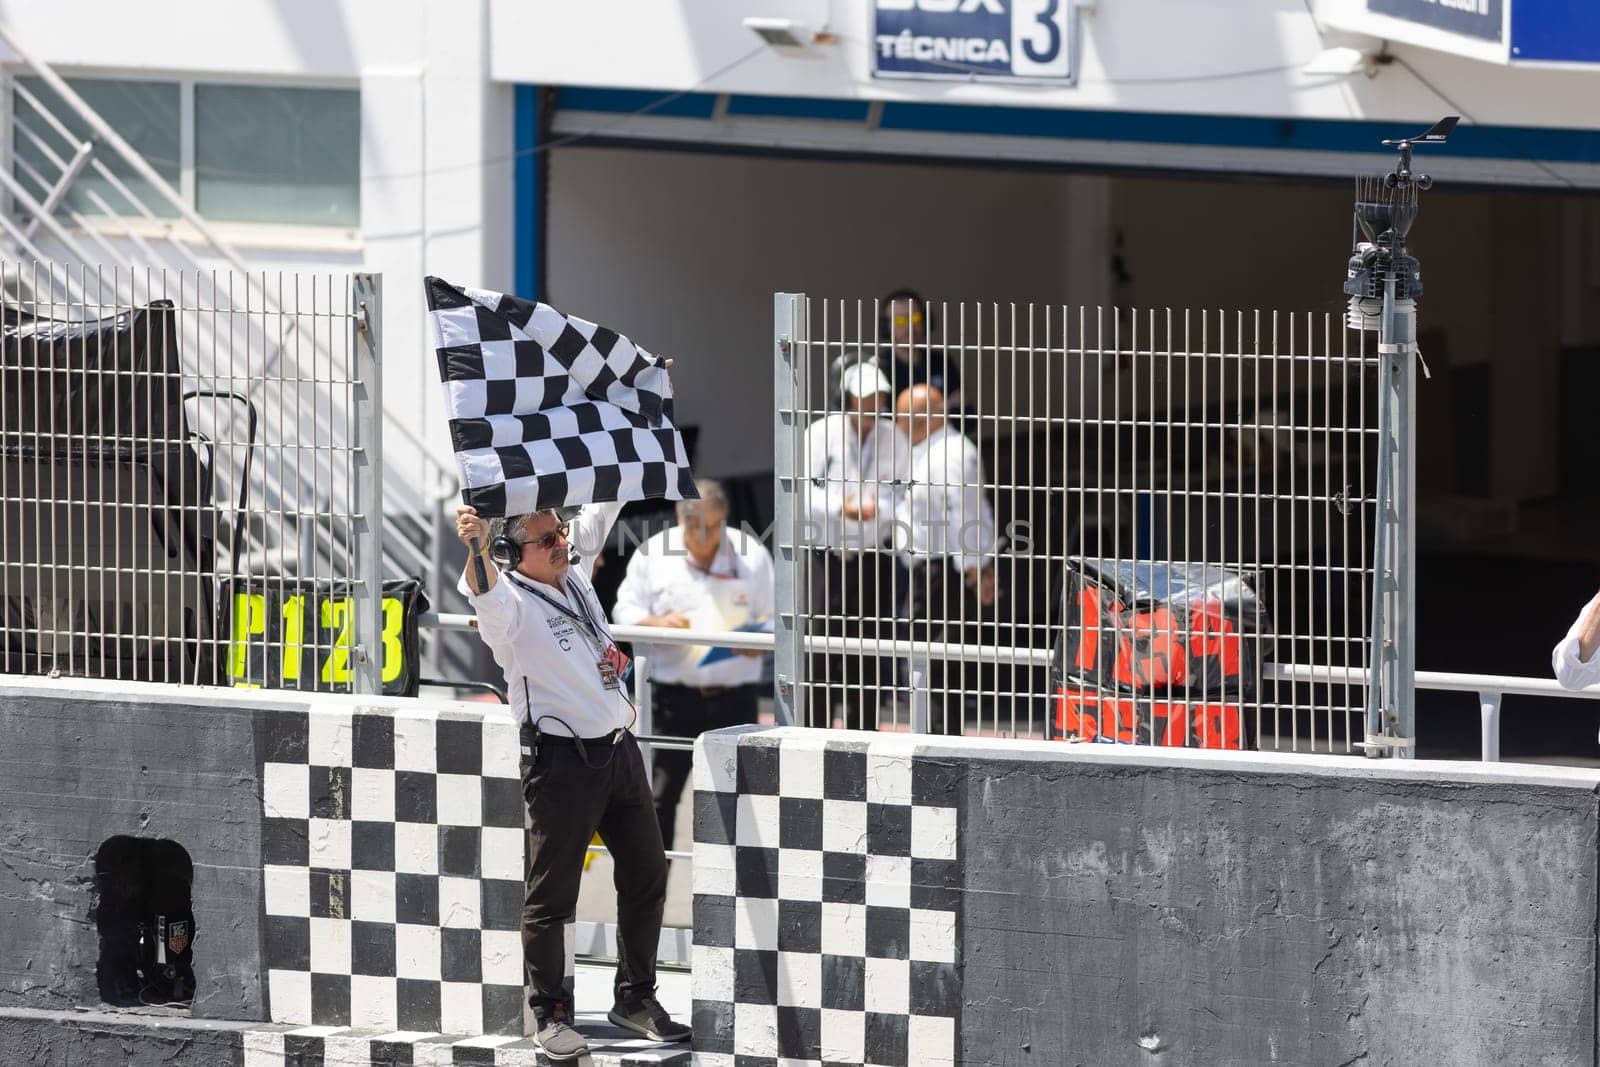 6 may 2023, Estoril, Portugal - MotoGP racing - A man holding a checkered umbrella standing on top of a race track